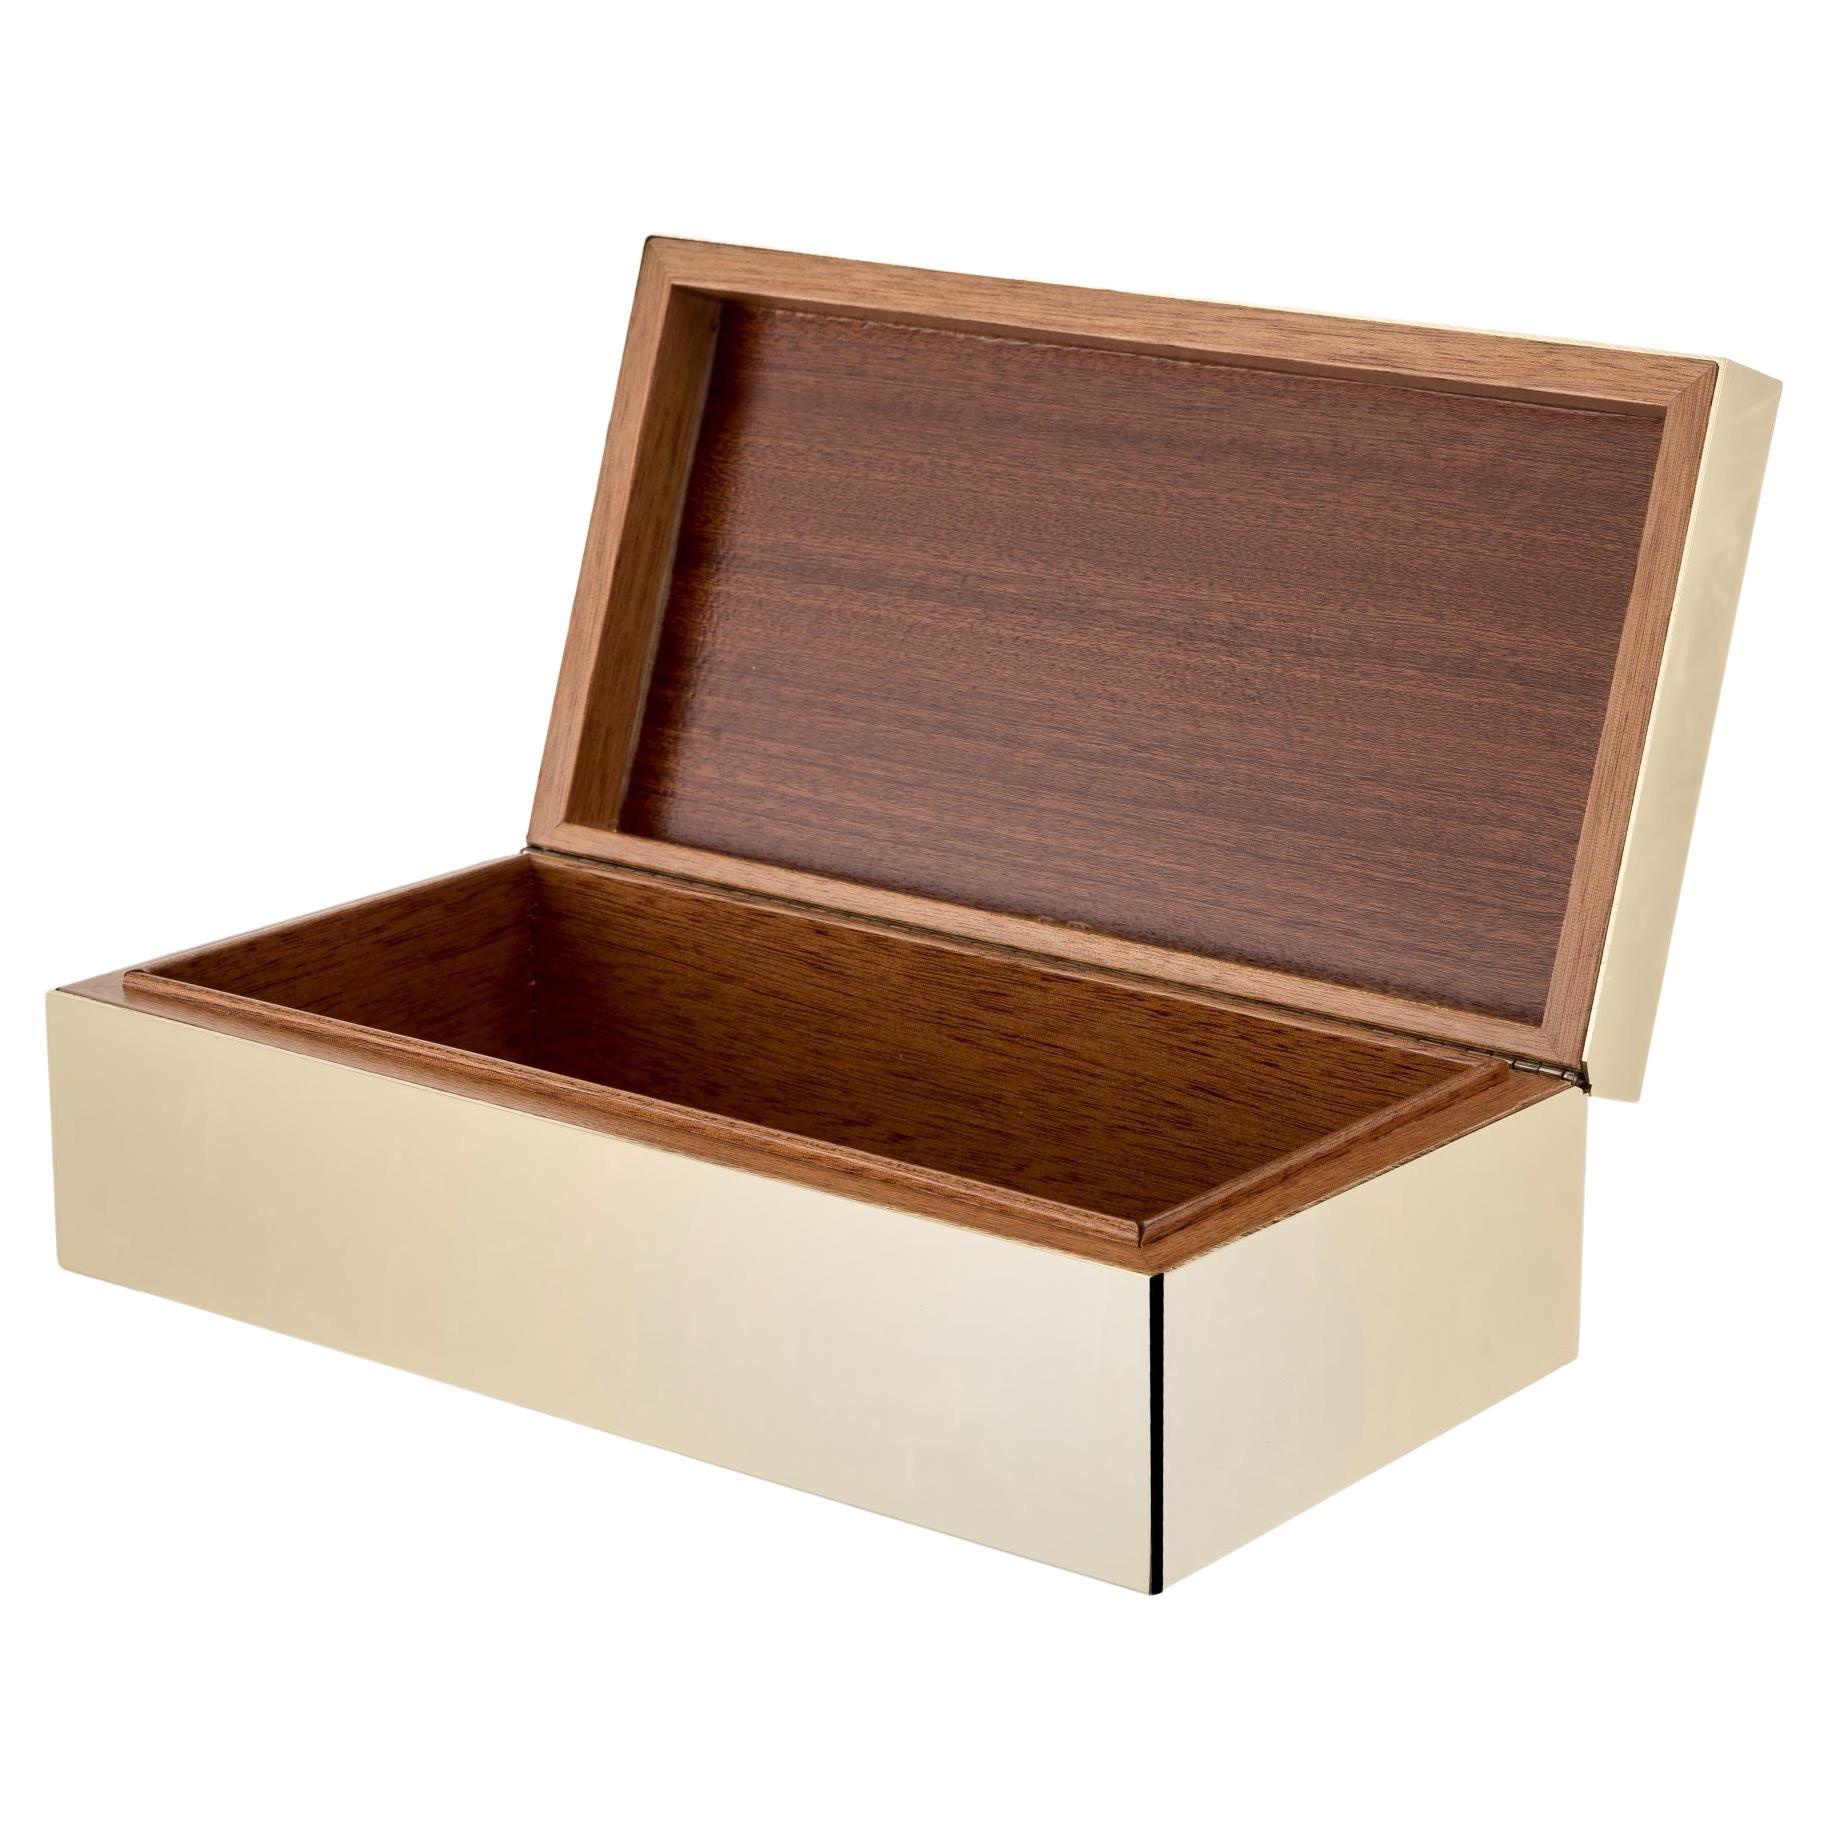 Brucaliffo Brass Cigar Box with Wooden Interior For Sale